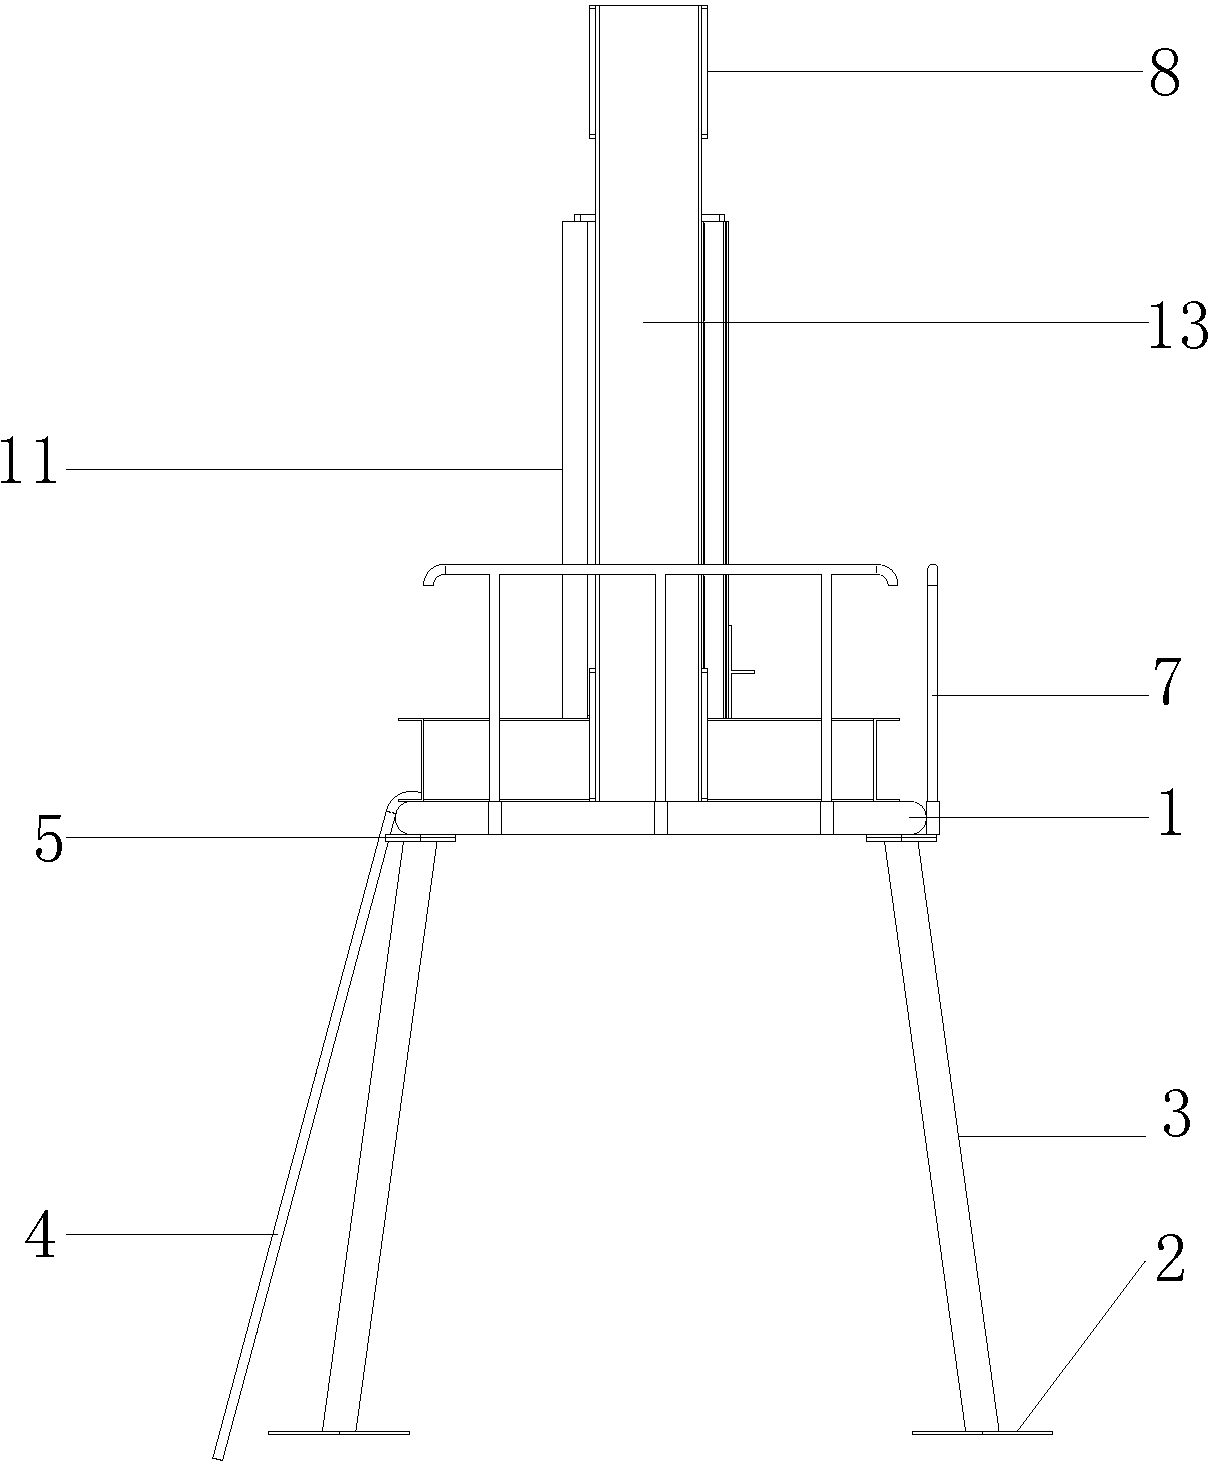 Stimulated comprehensive experimental device for anchorage construction of anchor bolt support